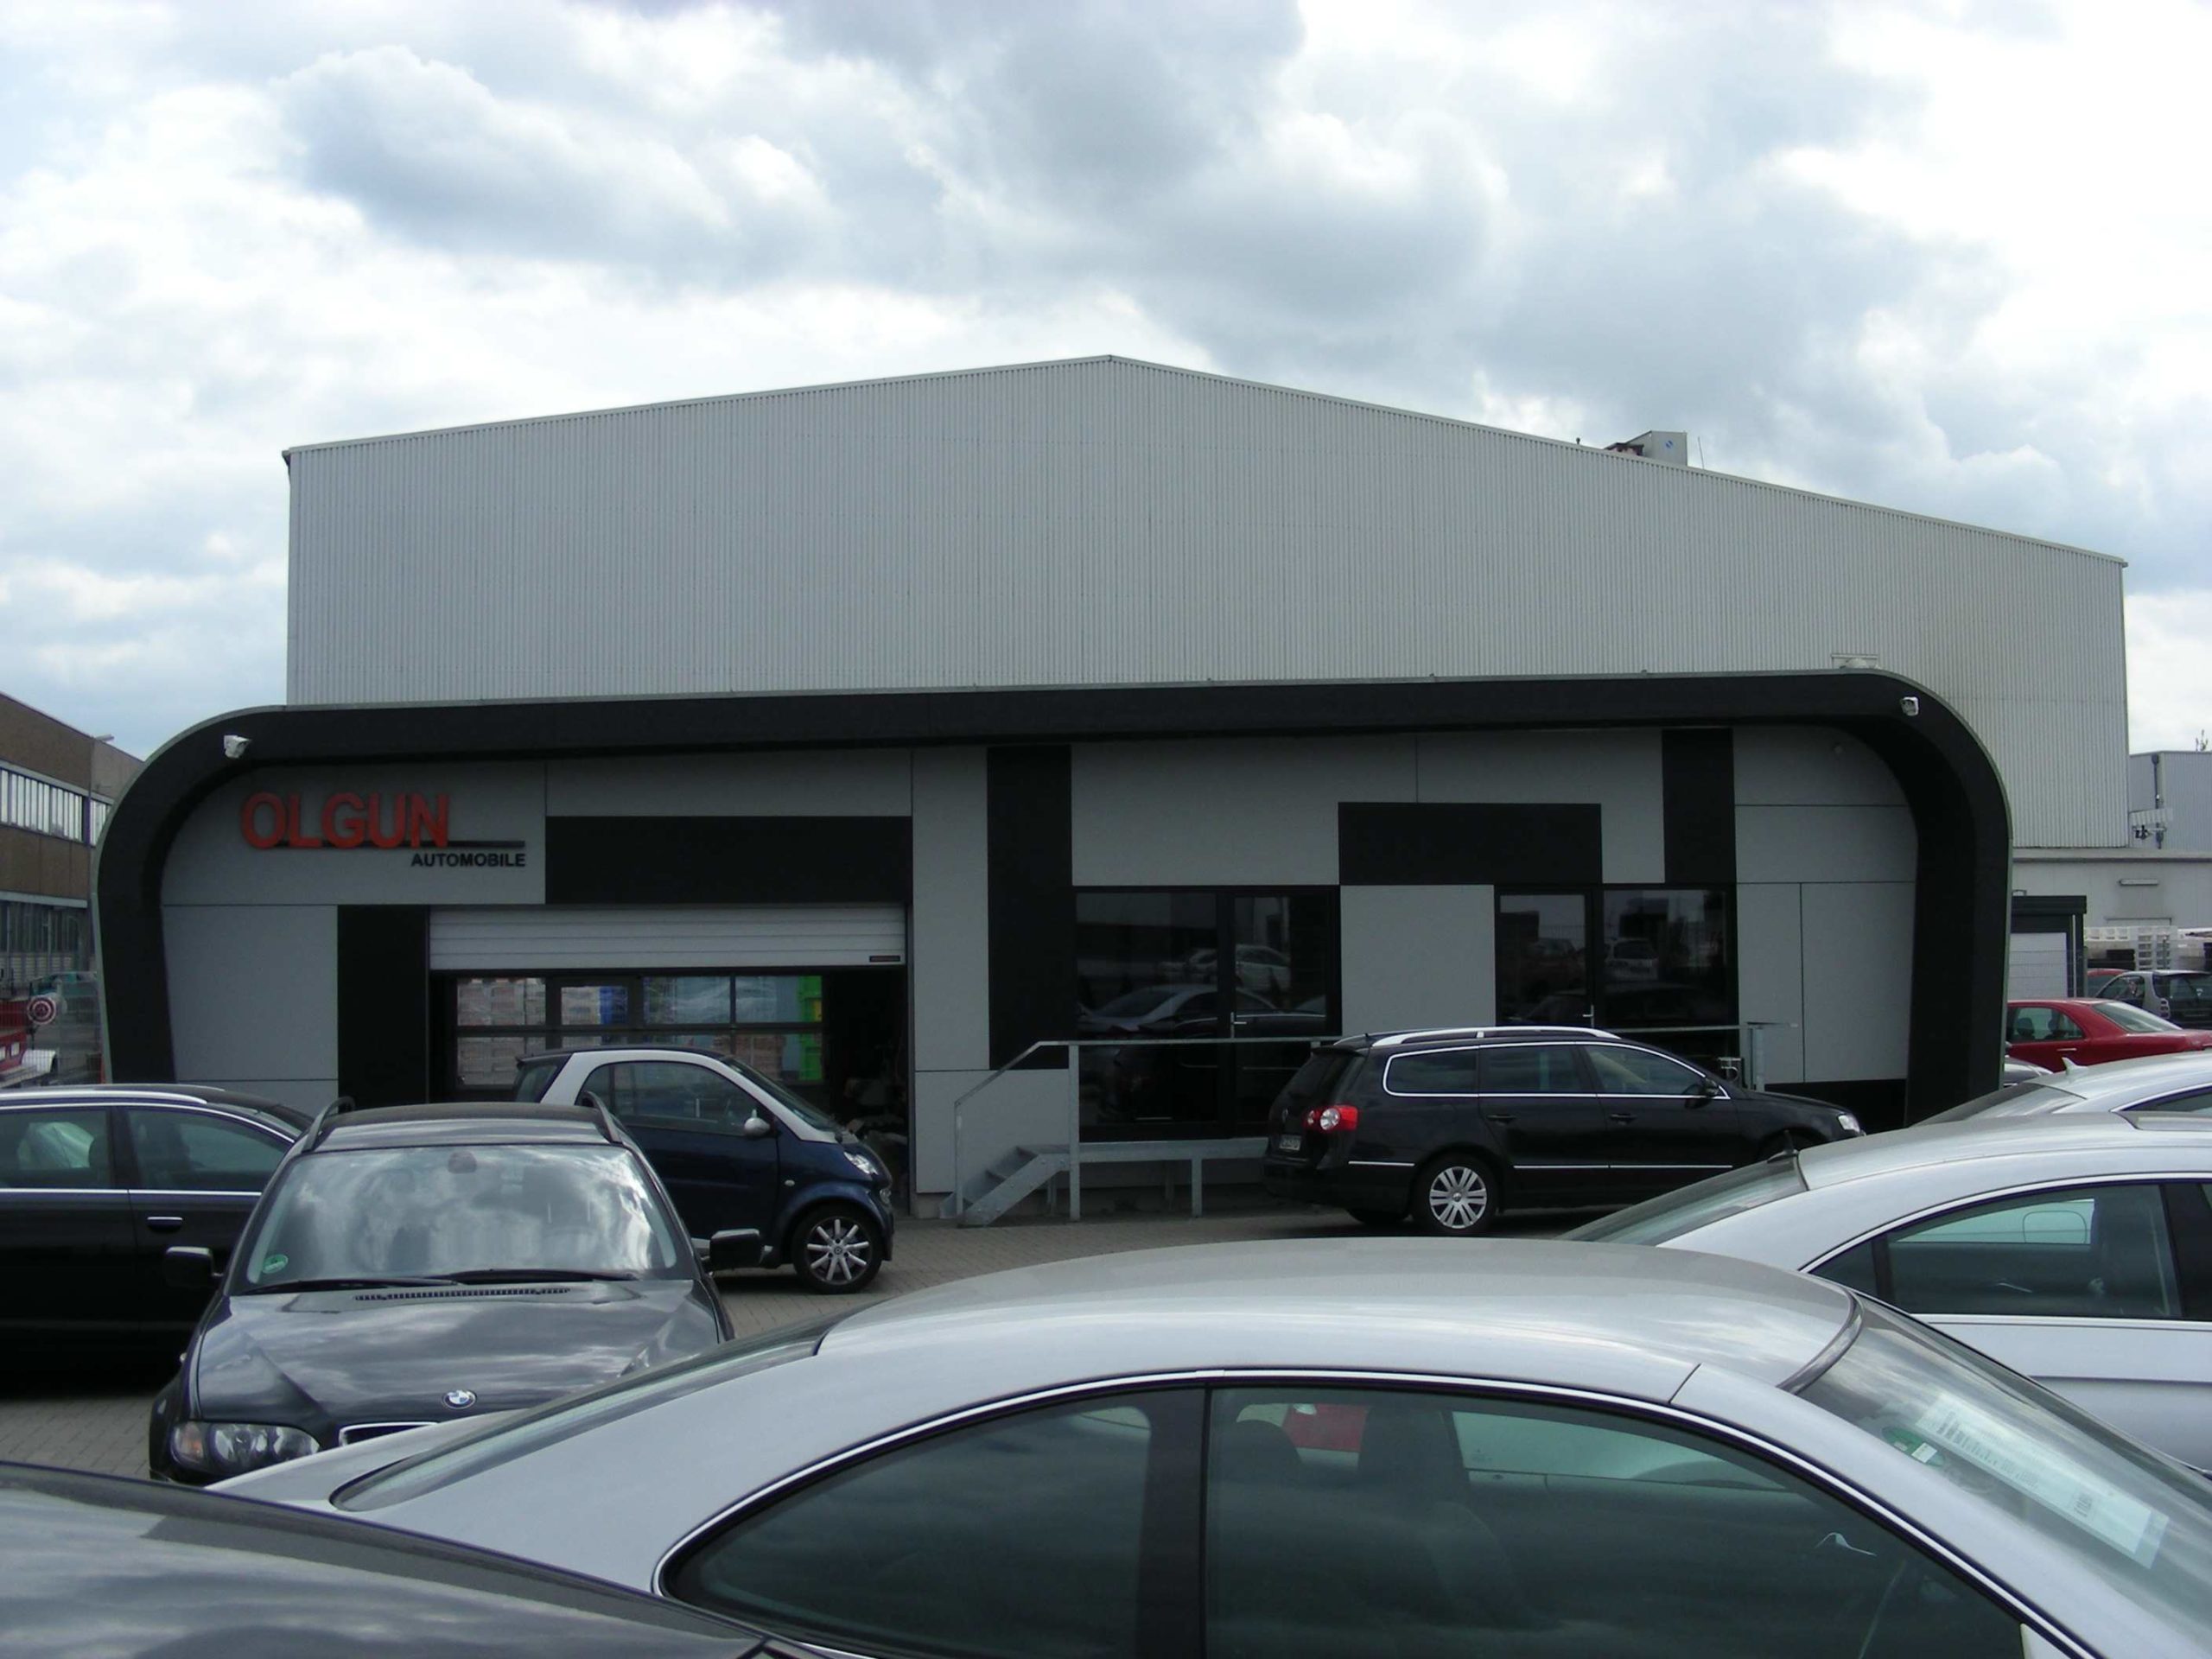 Autohaus in Holzbauweise